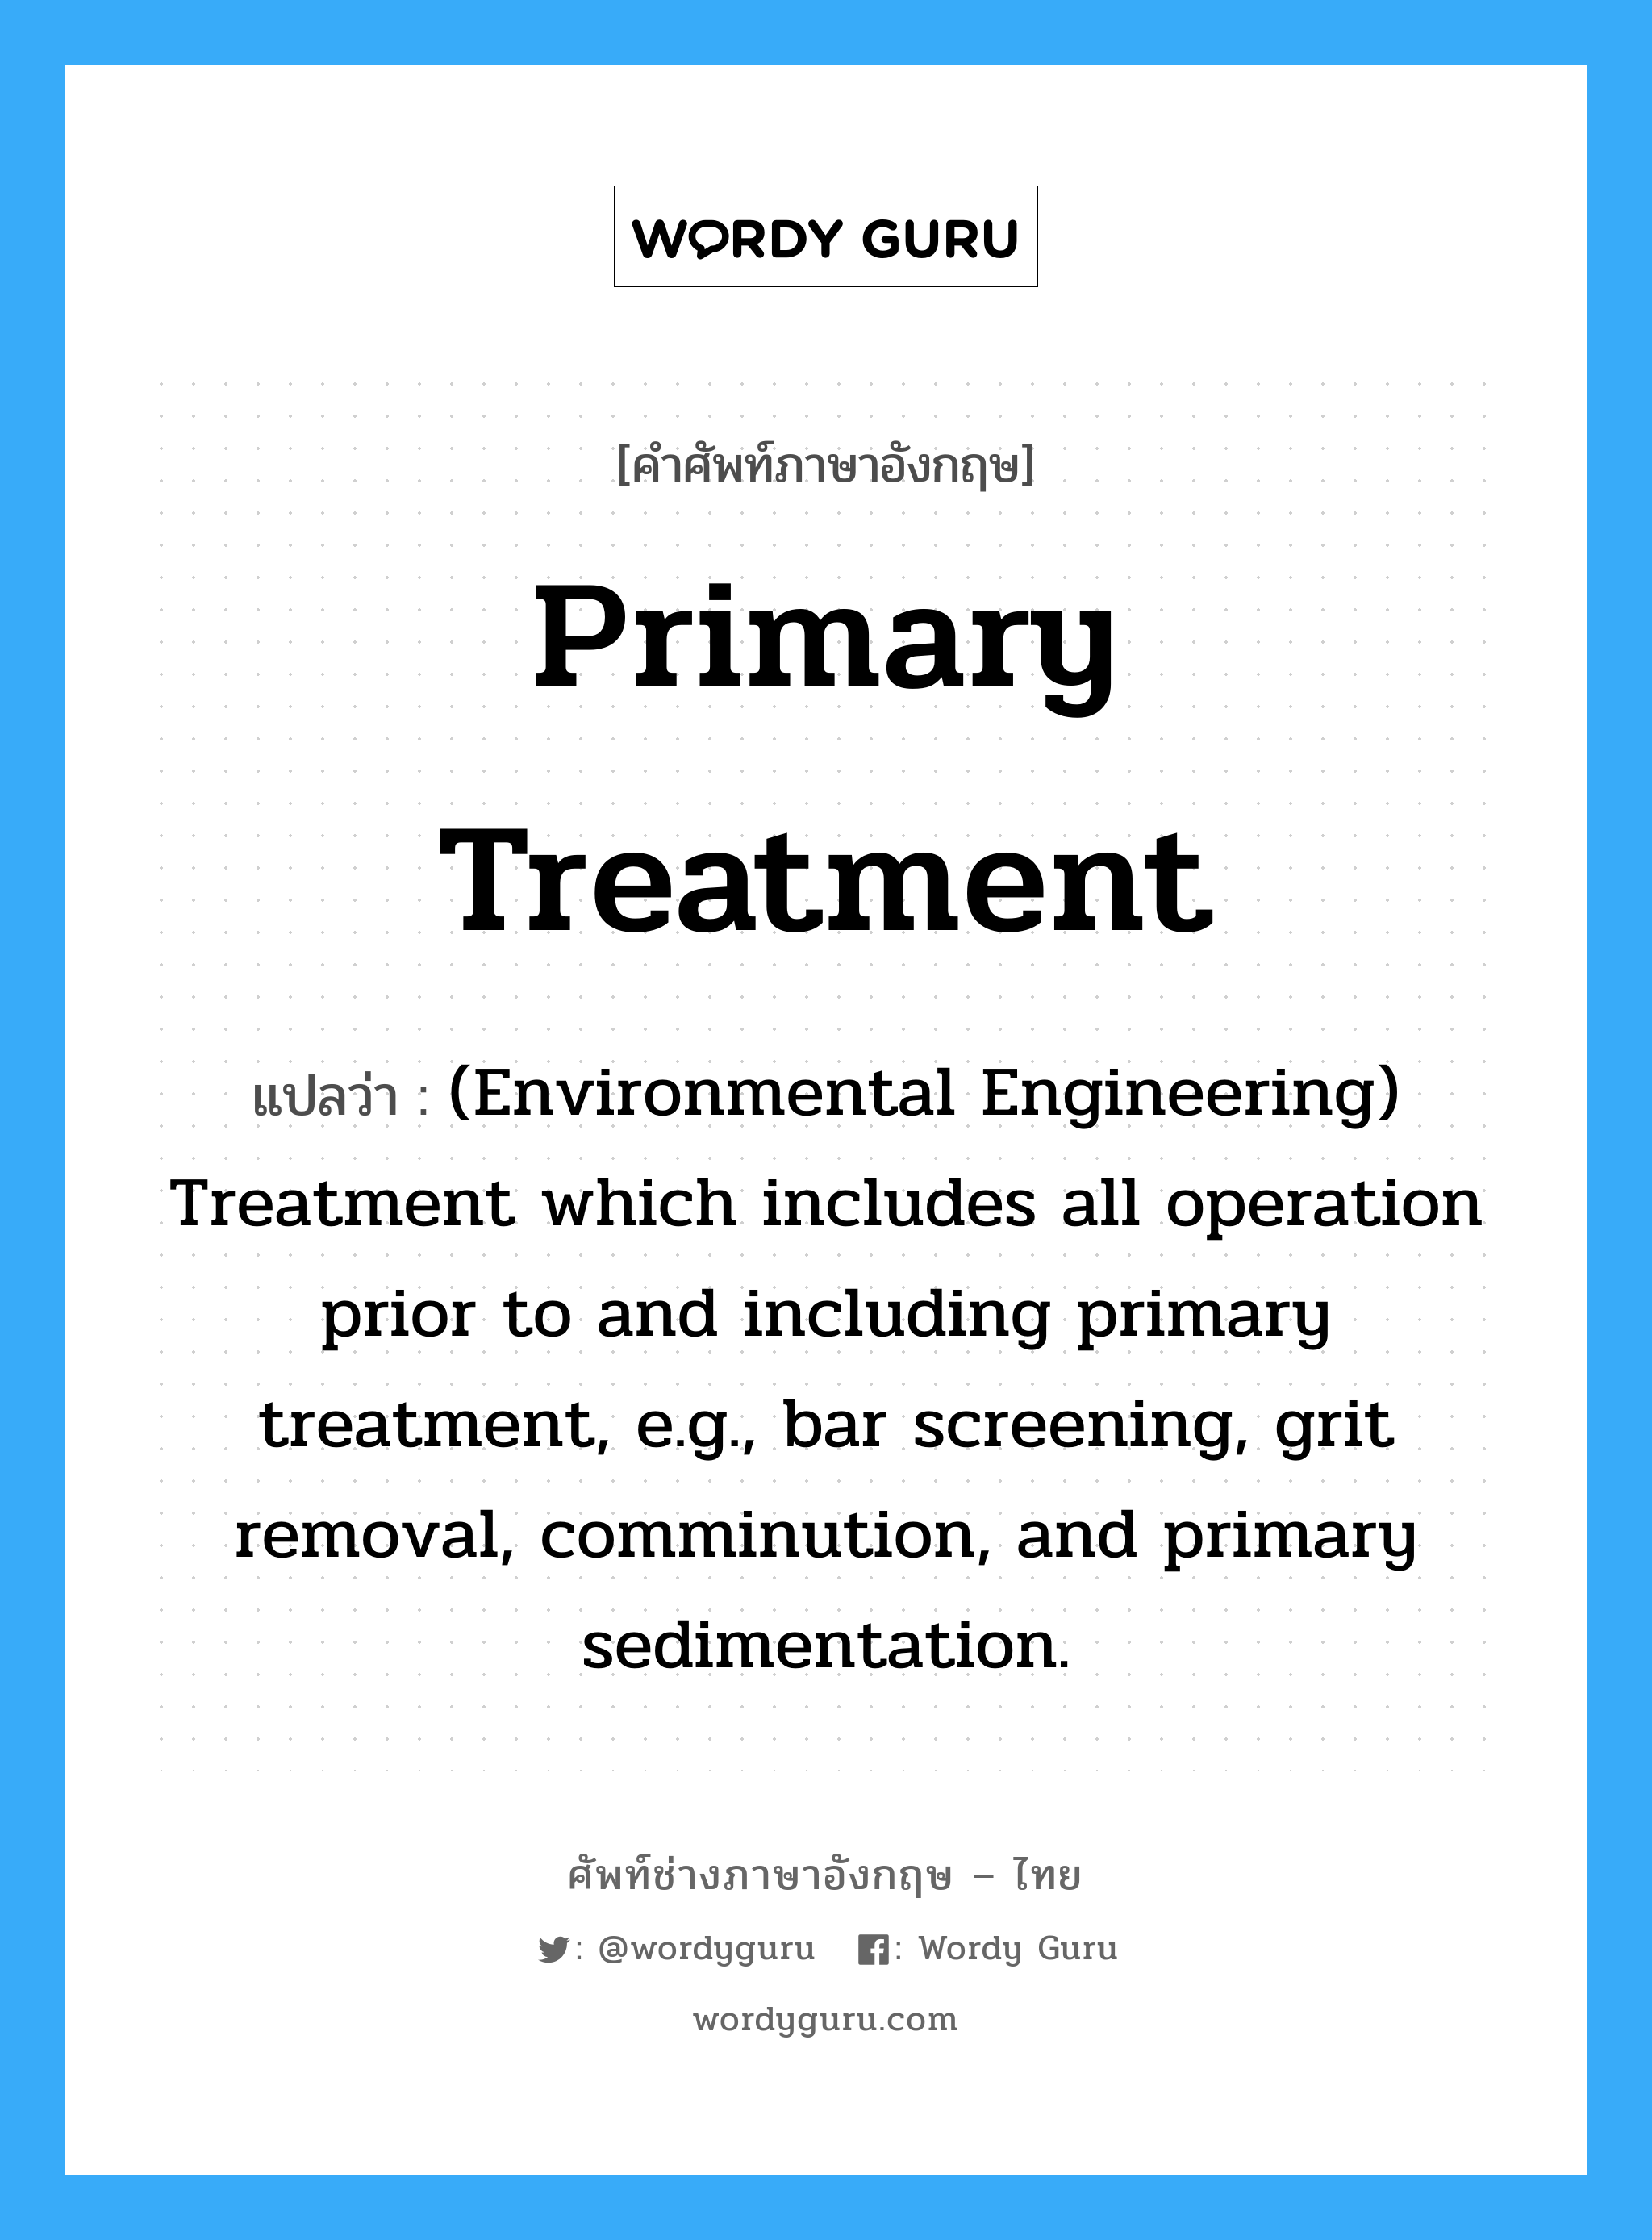 Primary treatment แปลว่า?, คำศัพท์ช่างภาษาอังกฤษ - ไทย Primary treatment คำศัพท์ภาษาอังกฤษ Primary treatment แปลว่า (Environmental Engineering) Treatment which includes all operation prior to and including primary treatment, e.g., bar screening, grit removal, comminution, and primary sedimentation.